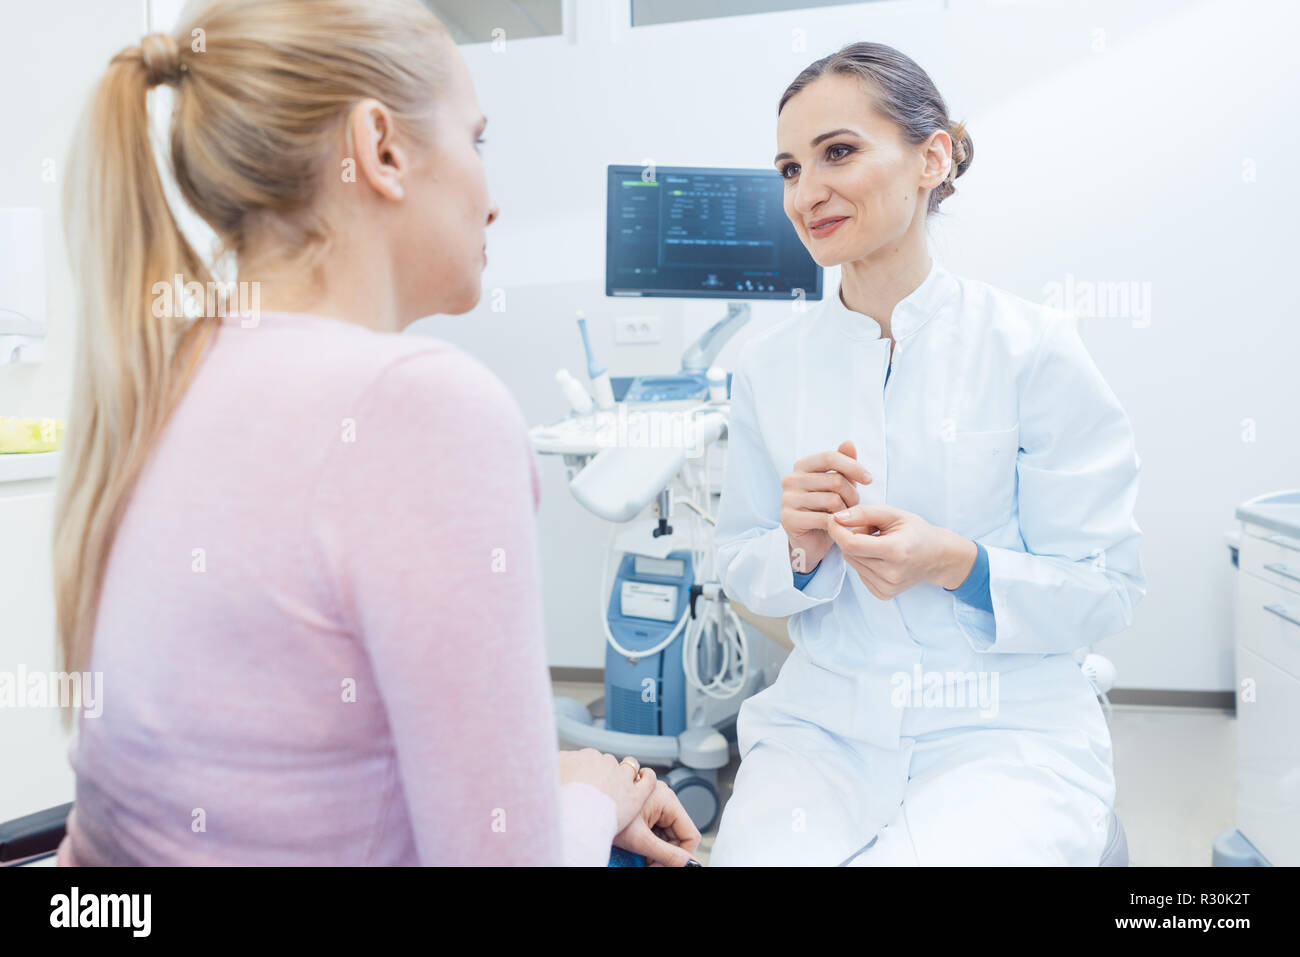 Woman at the gynecology examination with doctor Stock Photo